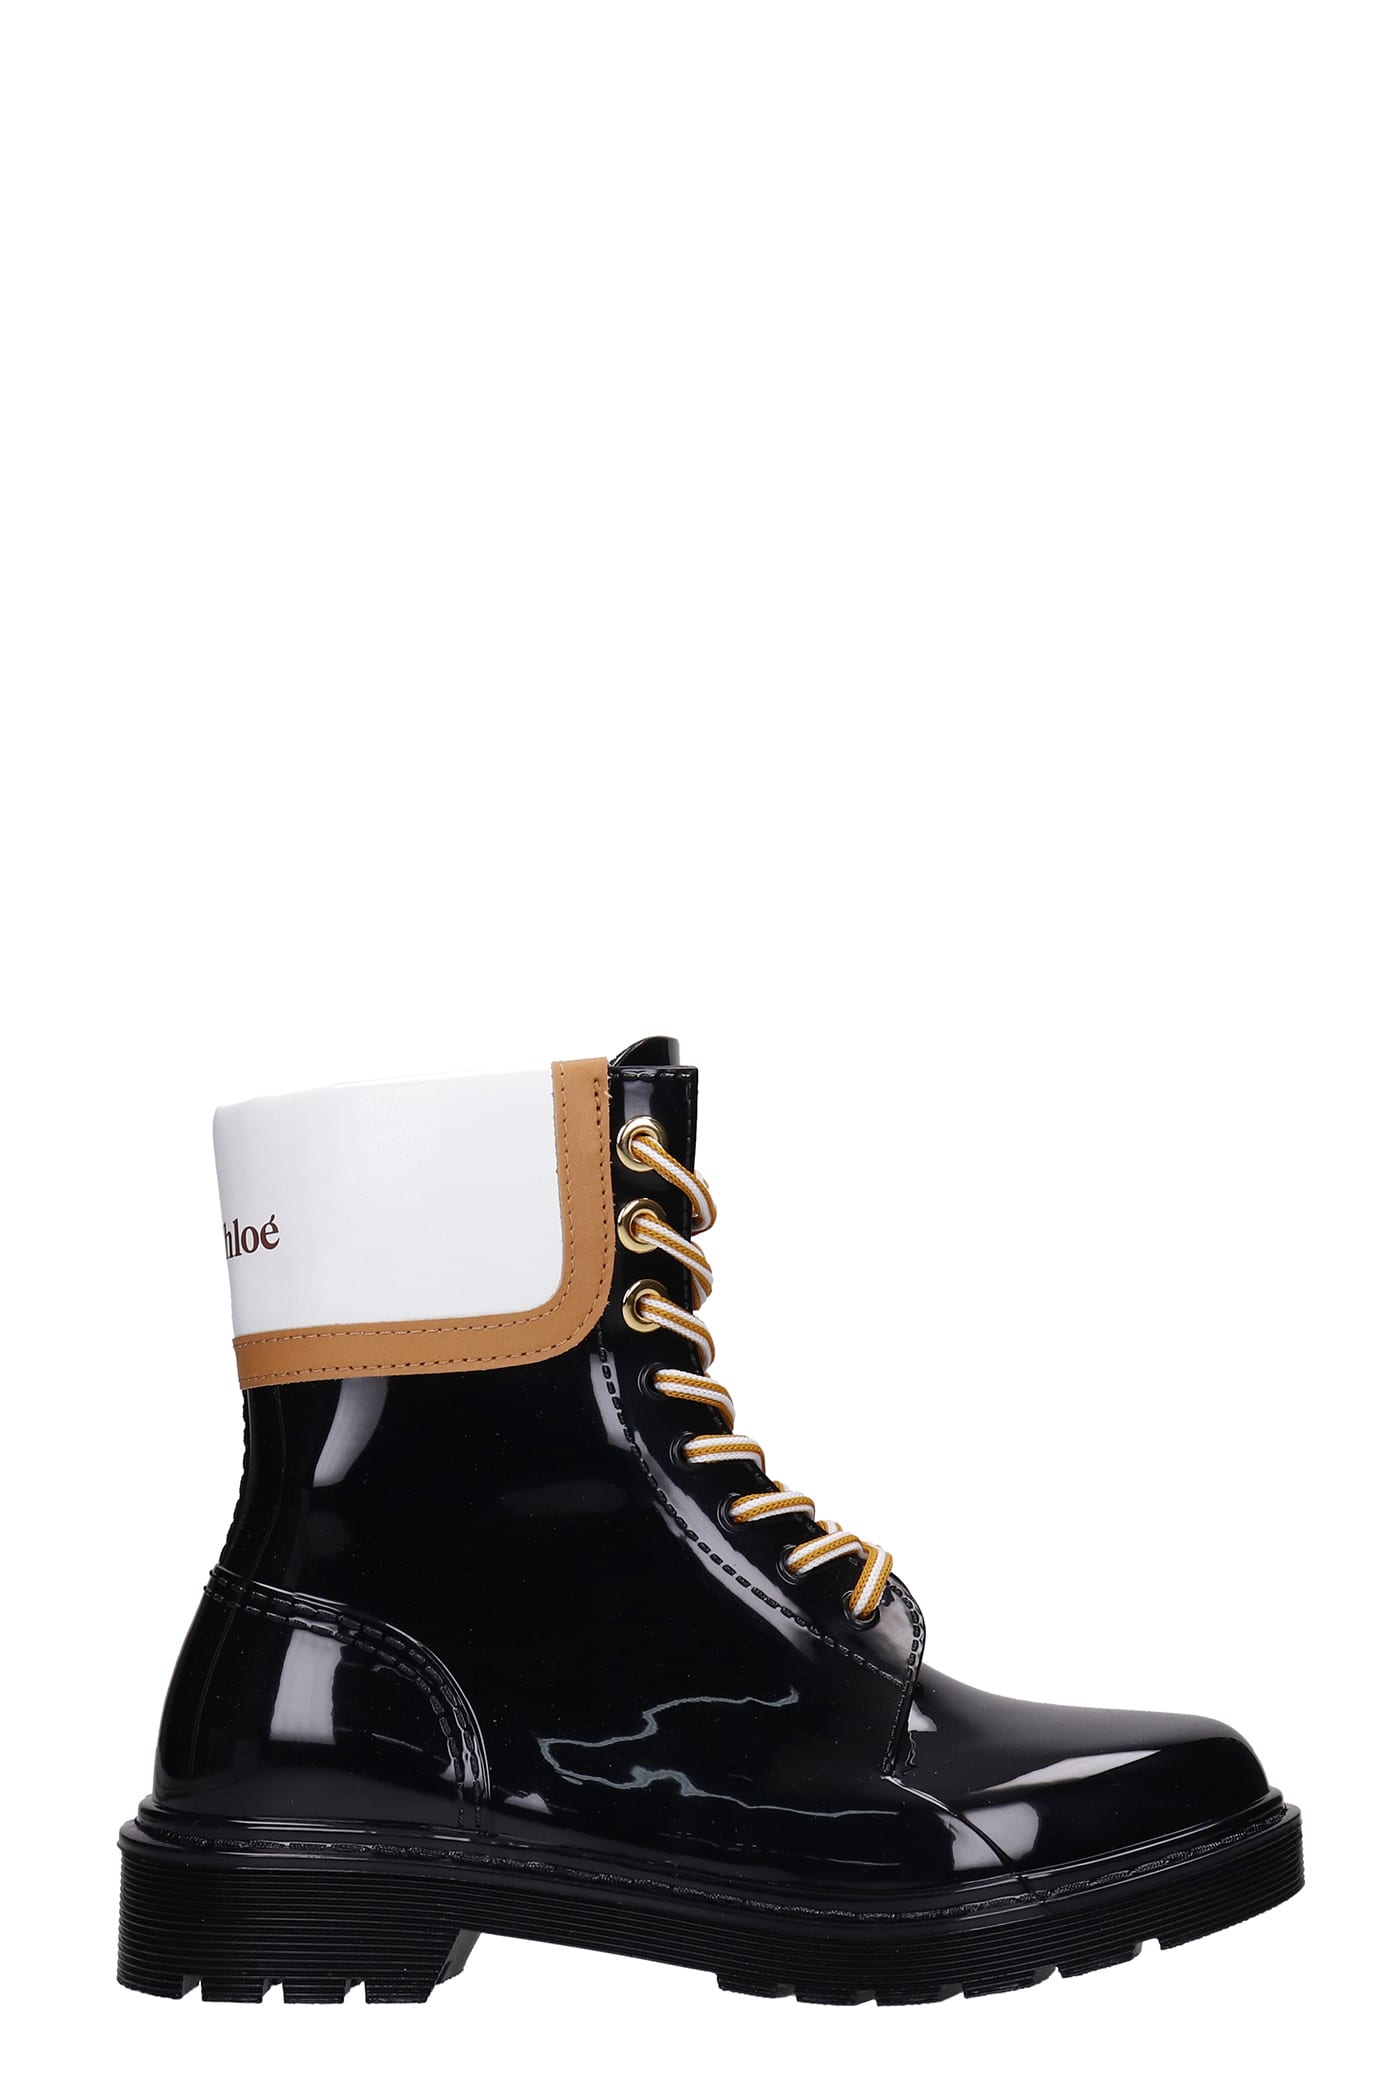 See by Chloé Florrie Combat Boots In Black Pvc